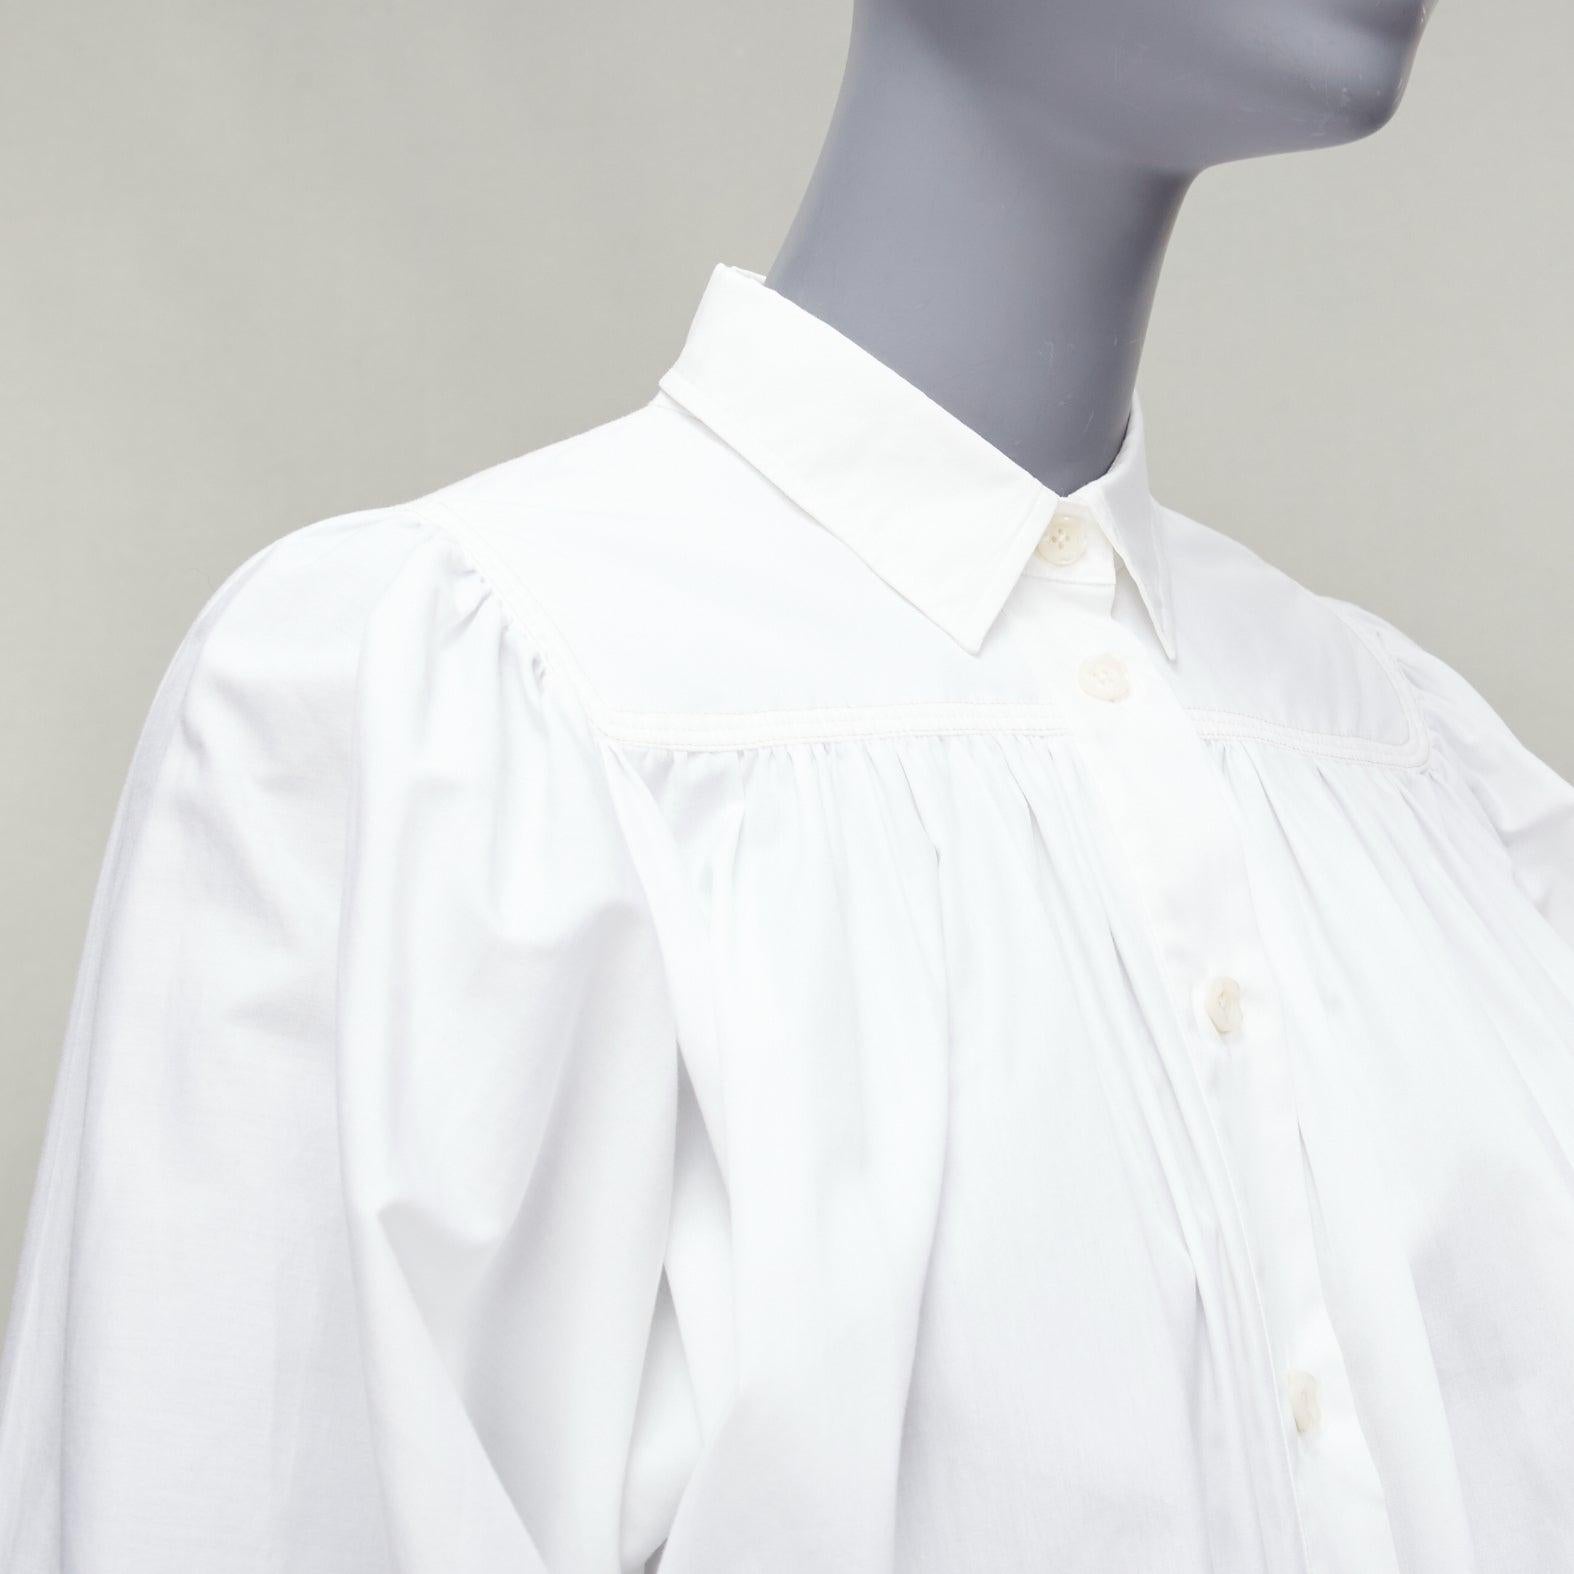 MARNI white cotton drawstring hem puff sleeve cropped blouse IT36 XXS
Reference: CELG/A00332
Brand: Marni
Material: Cotton
Color: White
Pattern: Solid
Closure: Button
Extra Details: Dolman sleeves. Back yoke.
Made in: Turkey

CONDITION:
Condition: